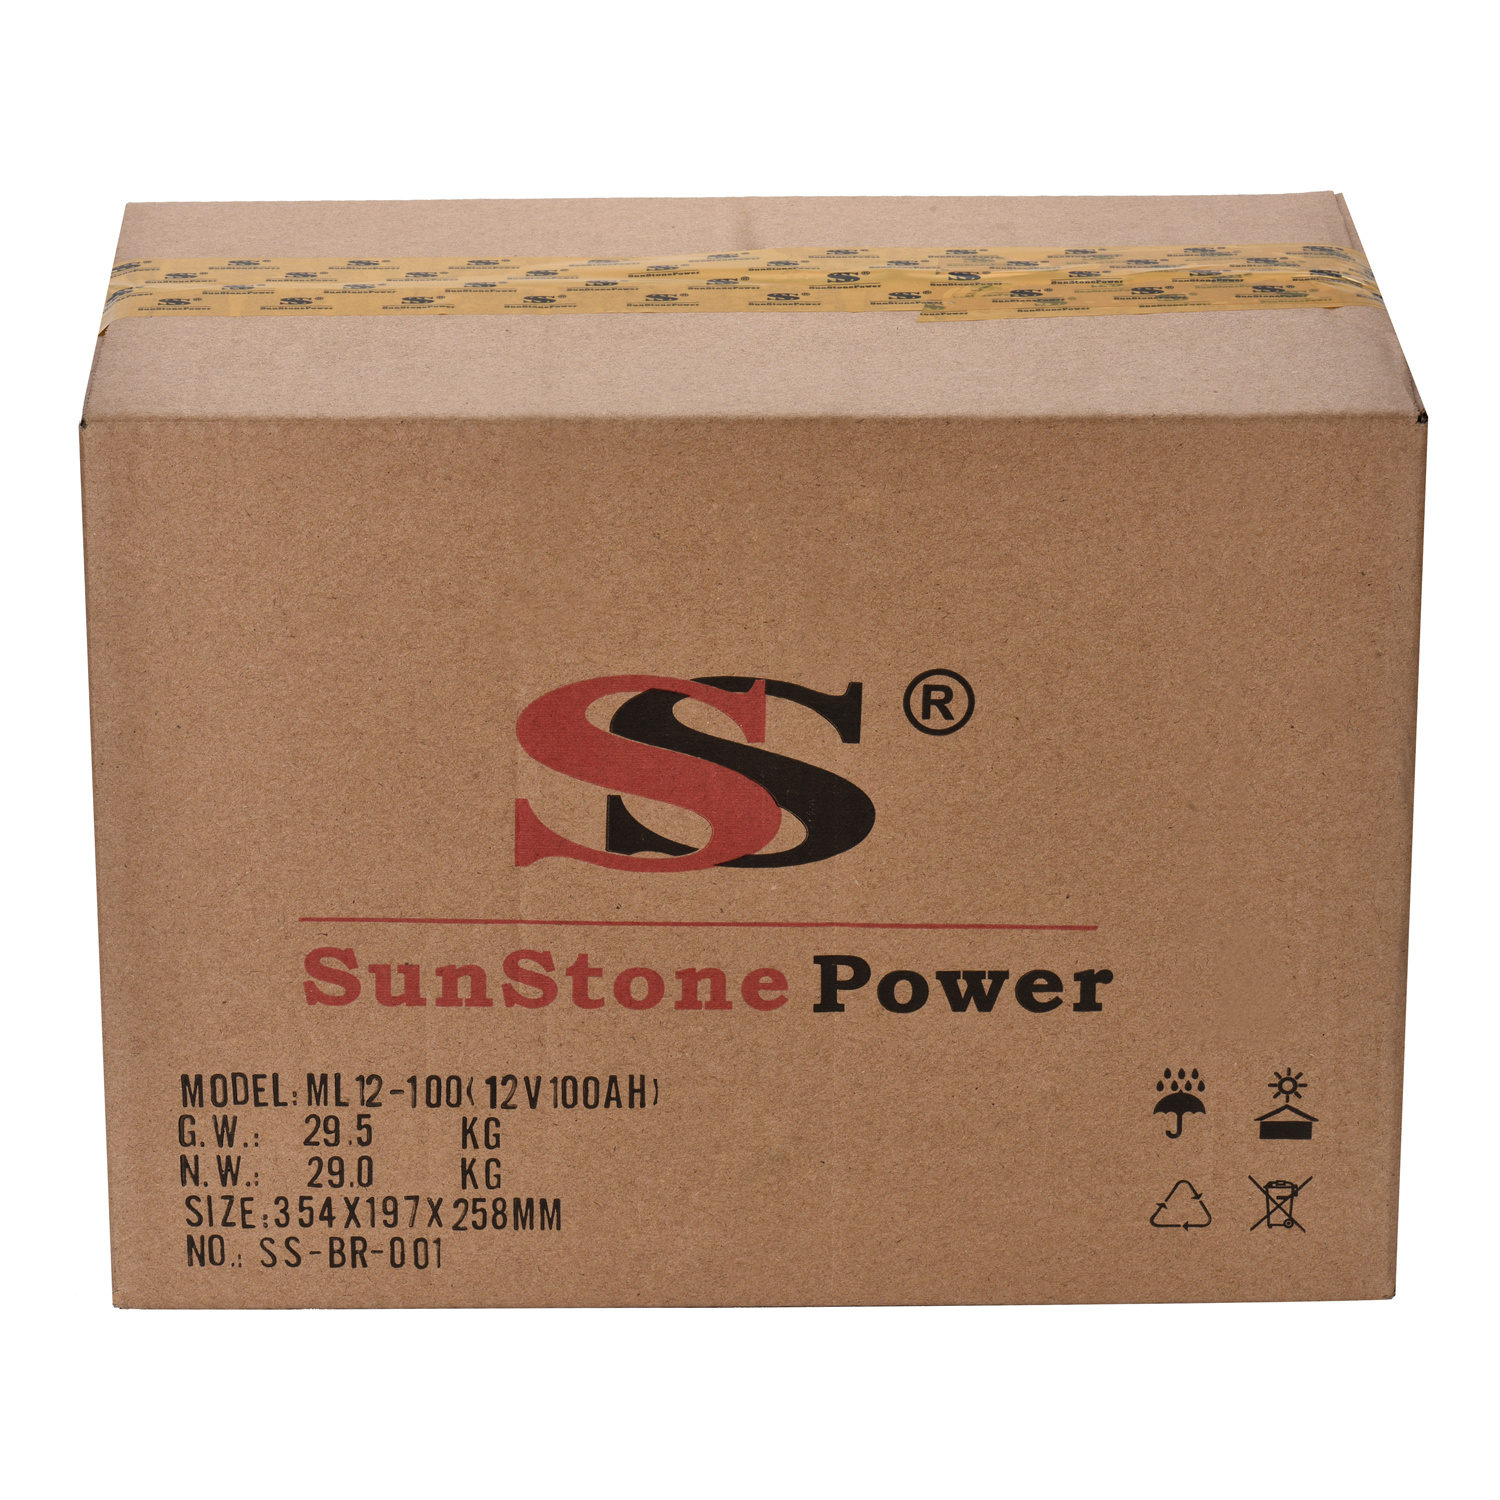 Sunstone Power 12V 110AH Deep Cycle Rechargeable UPS Battery Home